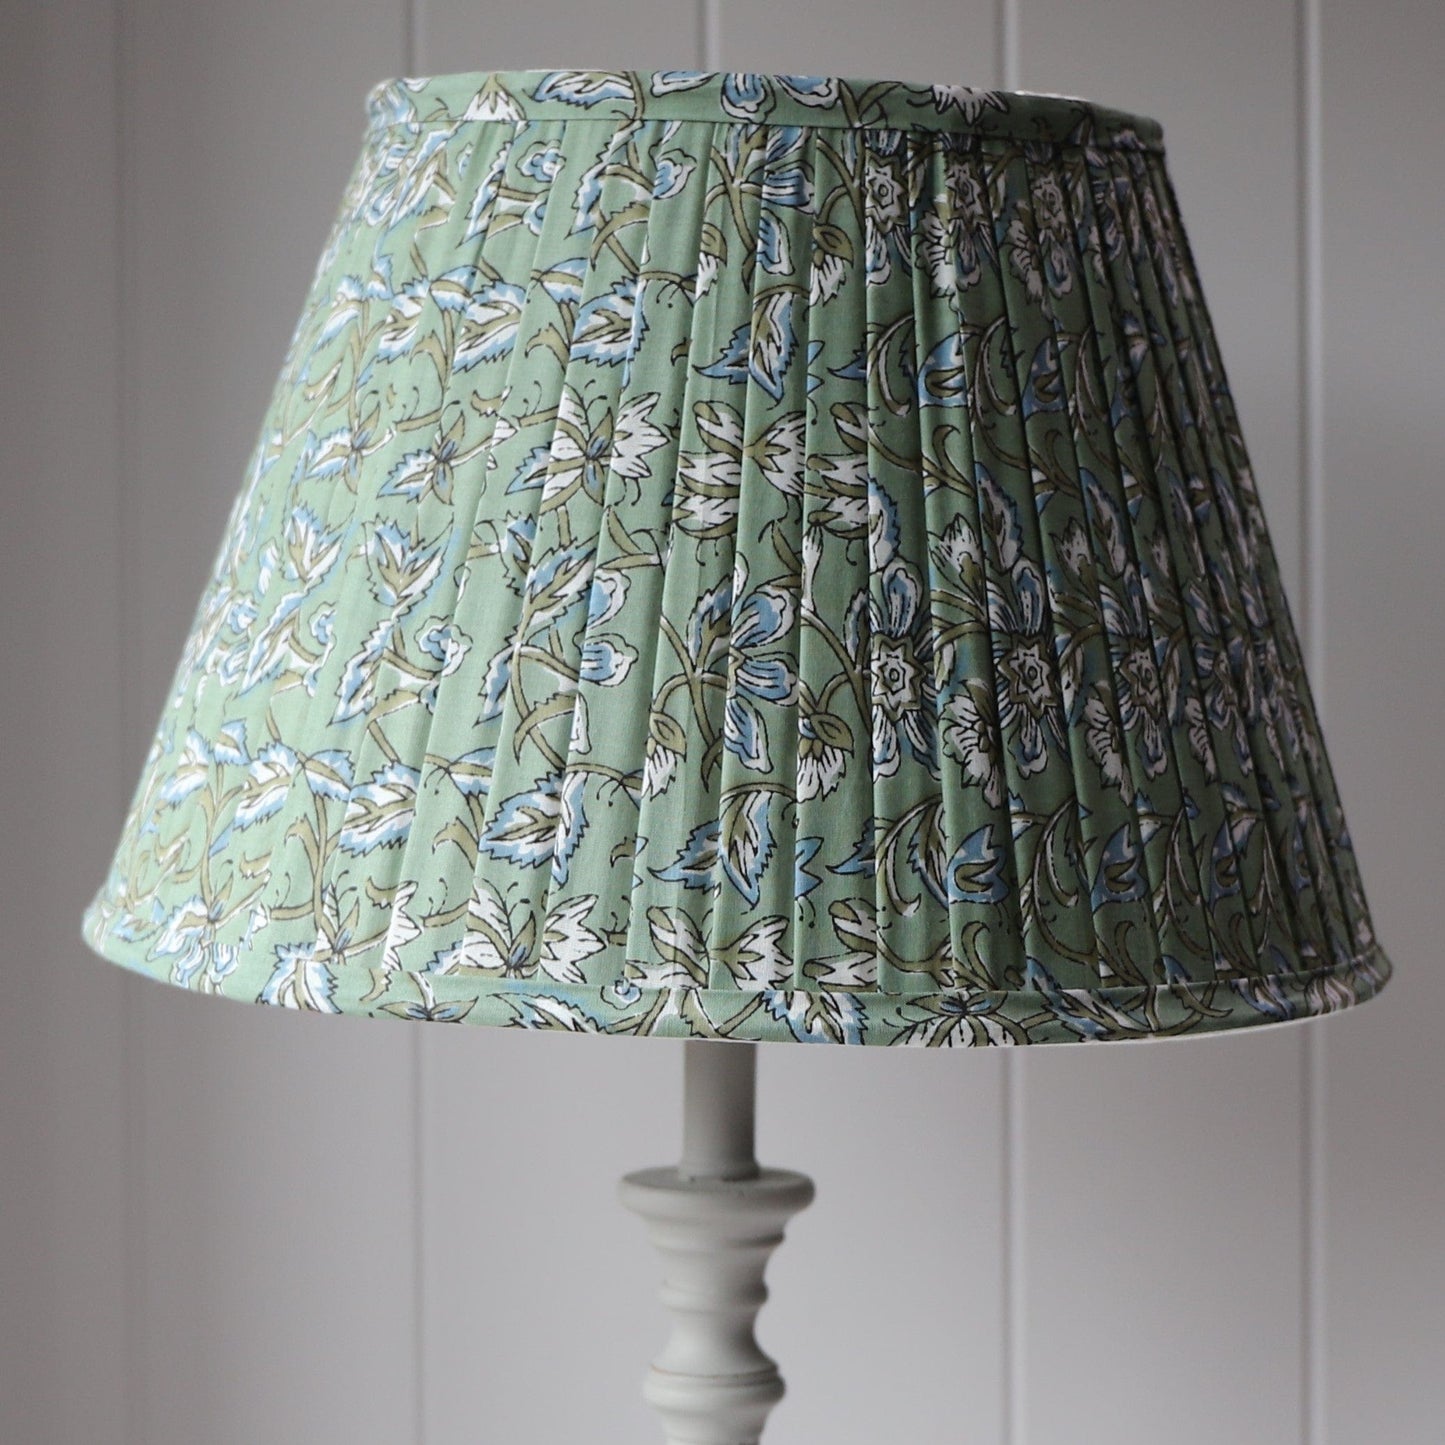 Outside Suppliers Empire Lampshade - Blue/Green Botanical 19504